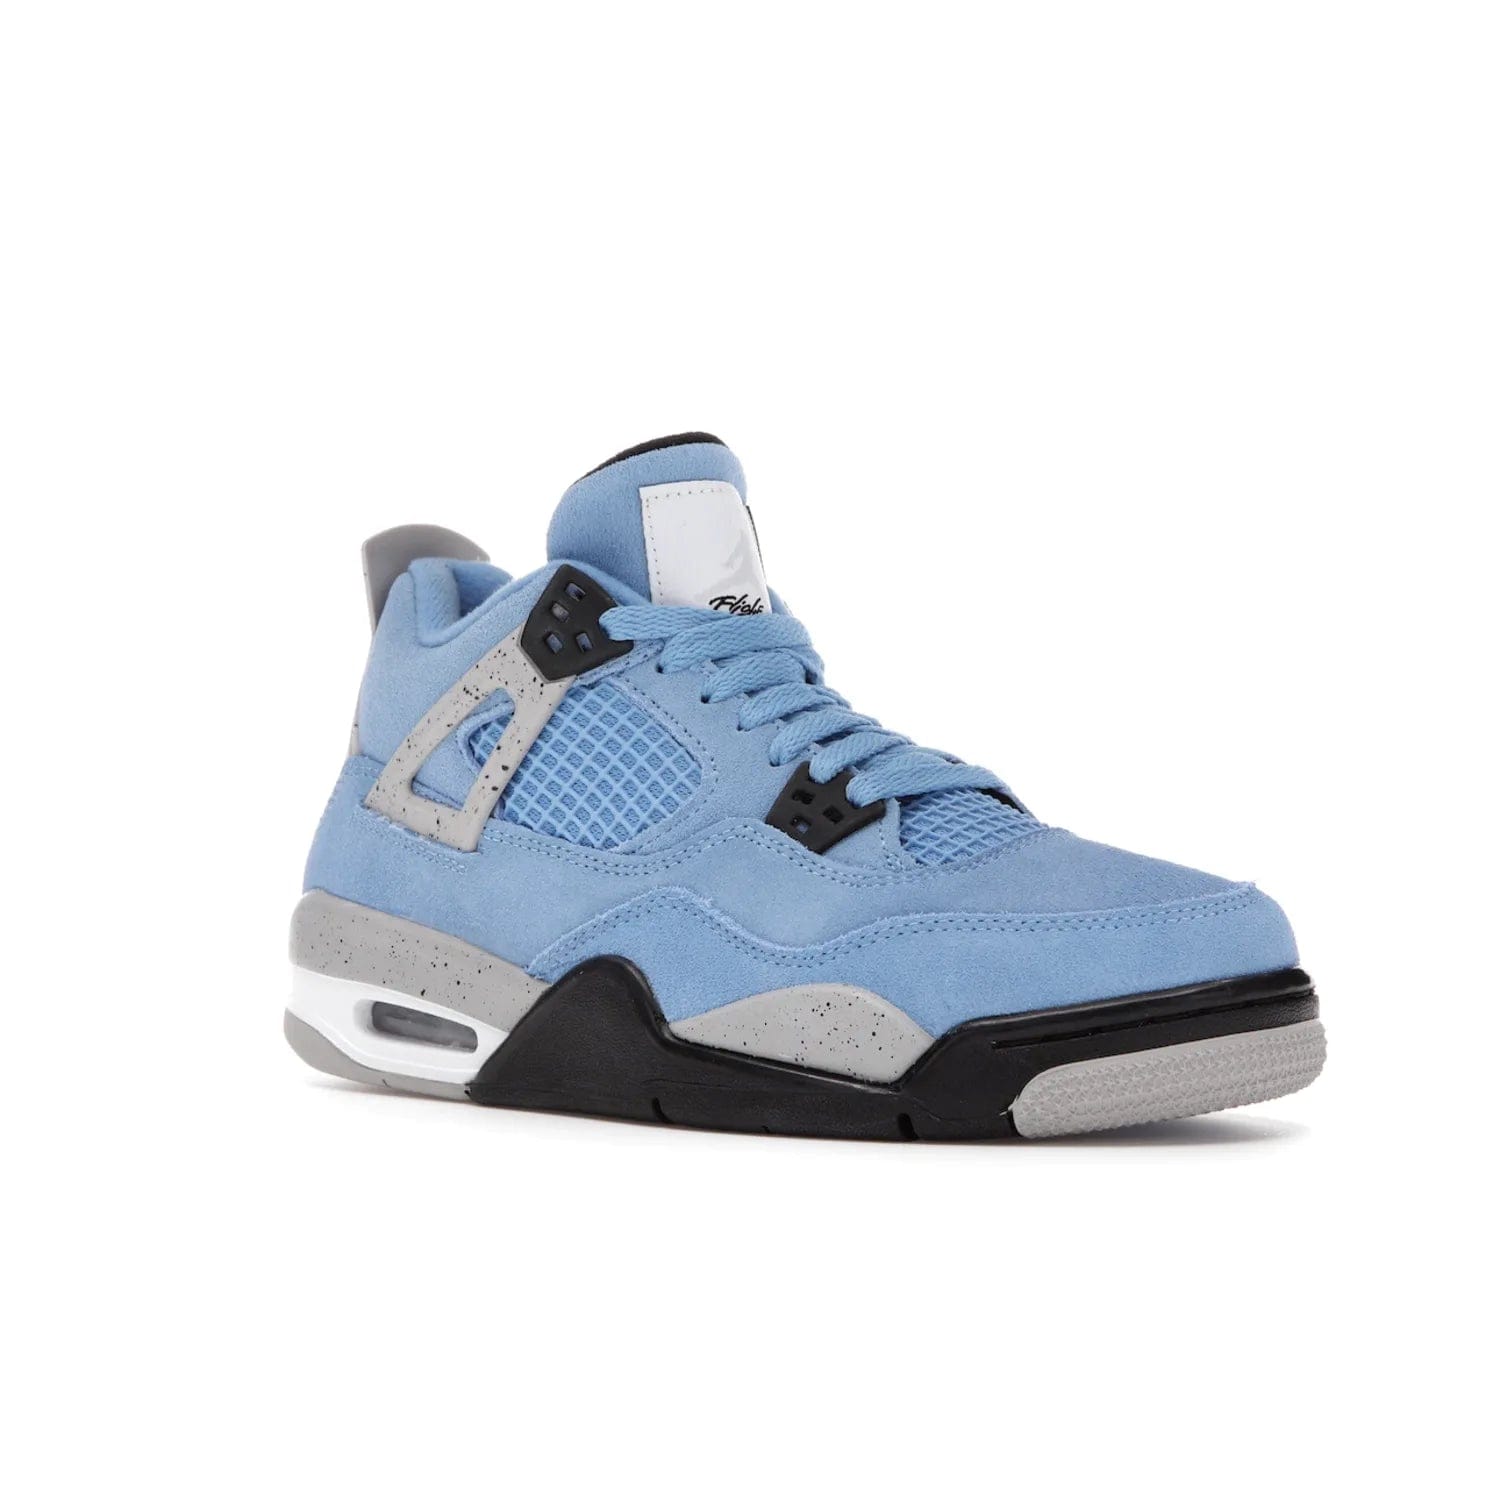 Jordan 4 Retro University Blue (GS) - Image 5 - Only at www.BallersClubKickz.com - Air Jordan 4 Retro University Blue GS: Classic silhouette and vibrant colors. Featuring a suede upper and Jumpman icon, this grade school-size shoe is perfect for collections and retails at $150.